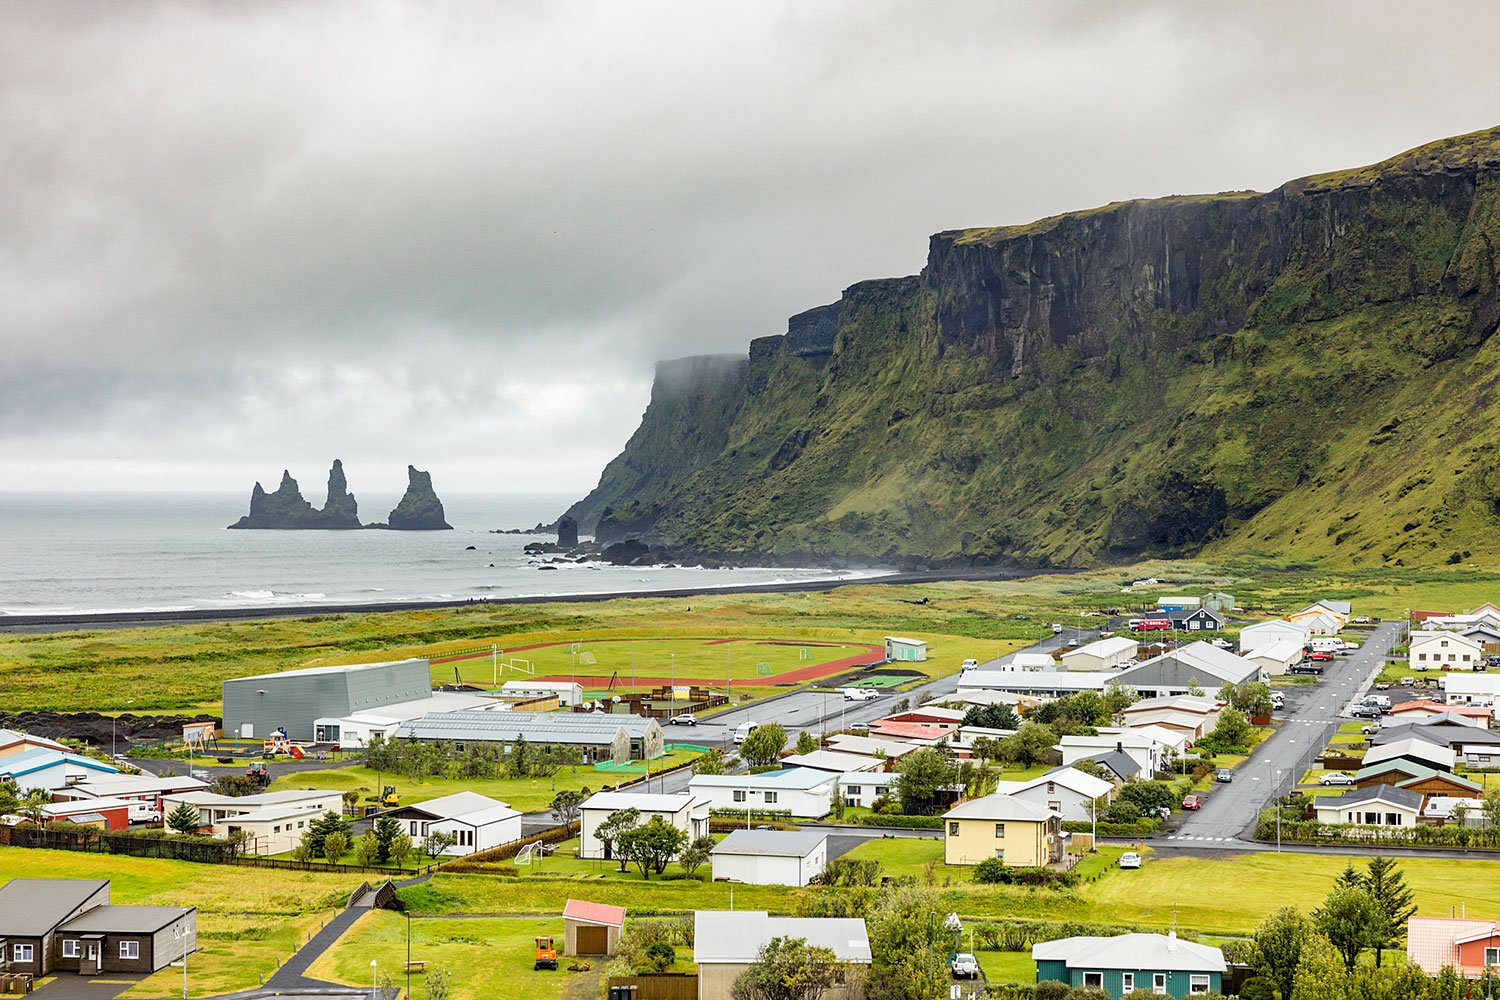 Town of Vik & Rock Formations. South Coast, Iceland, 2022